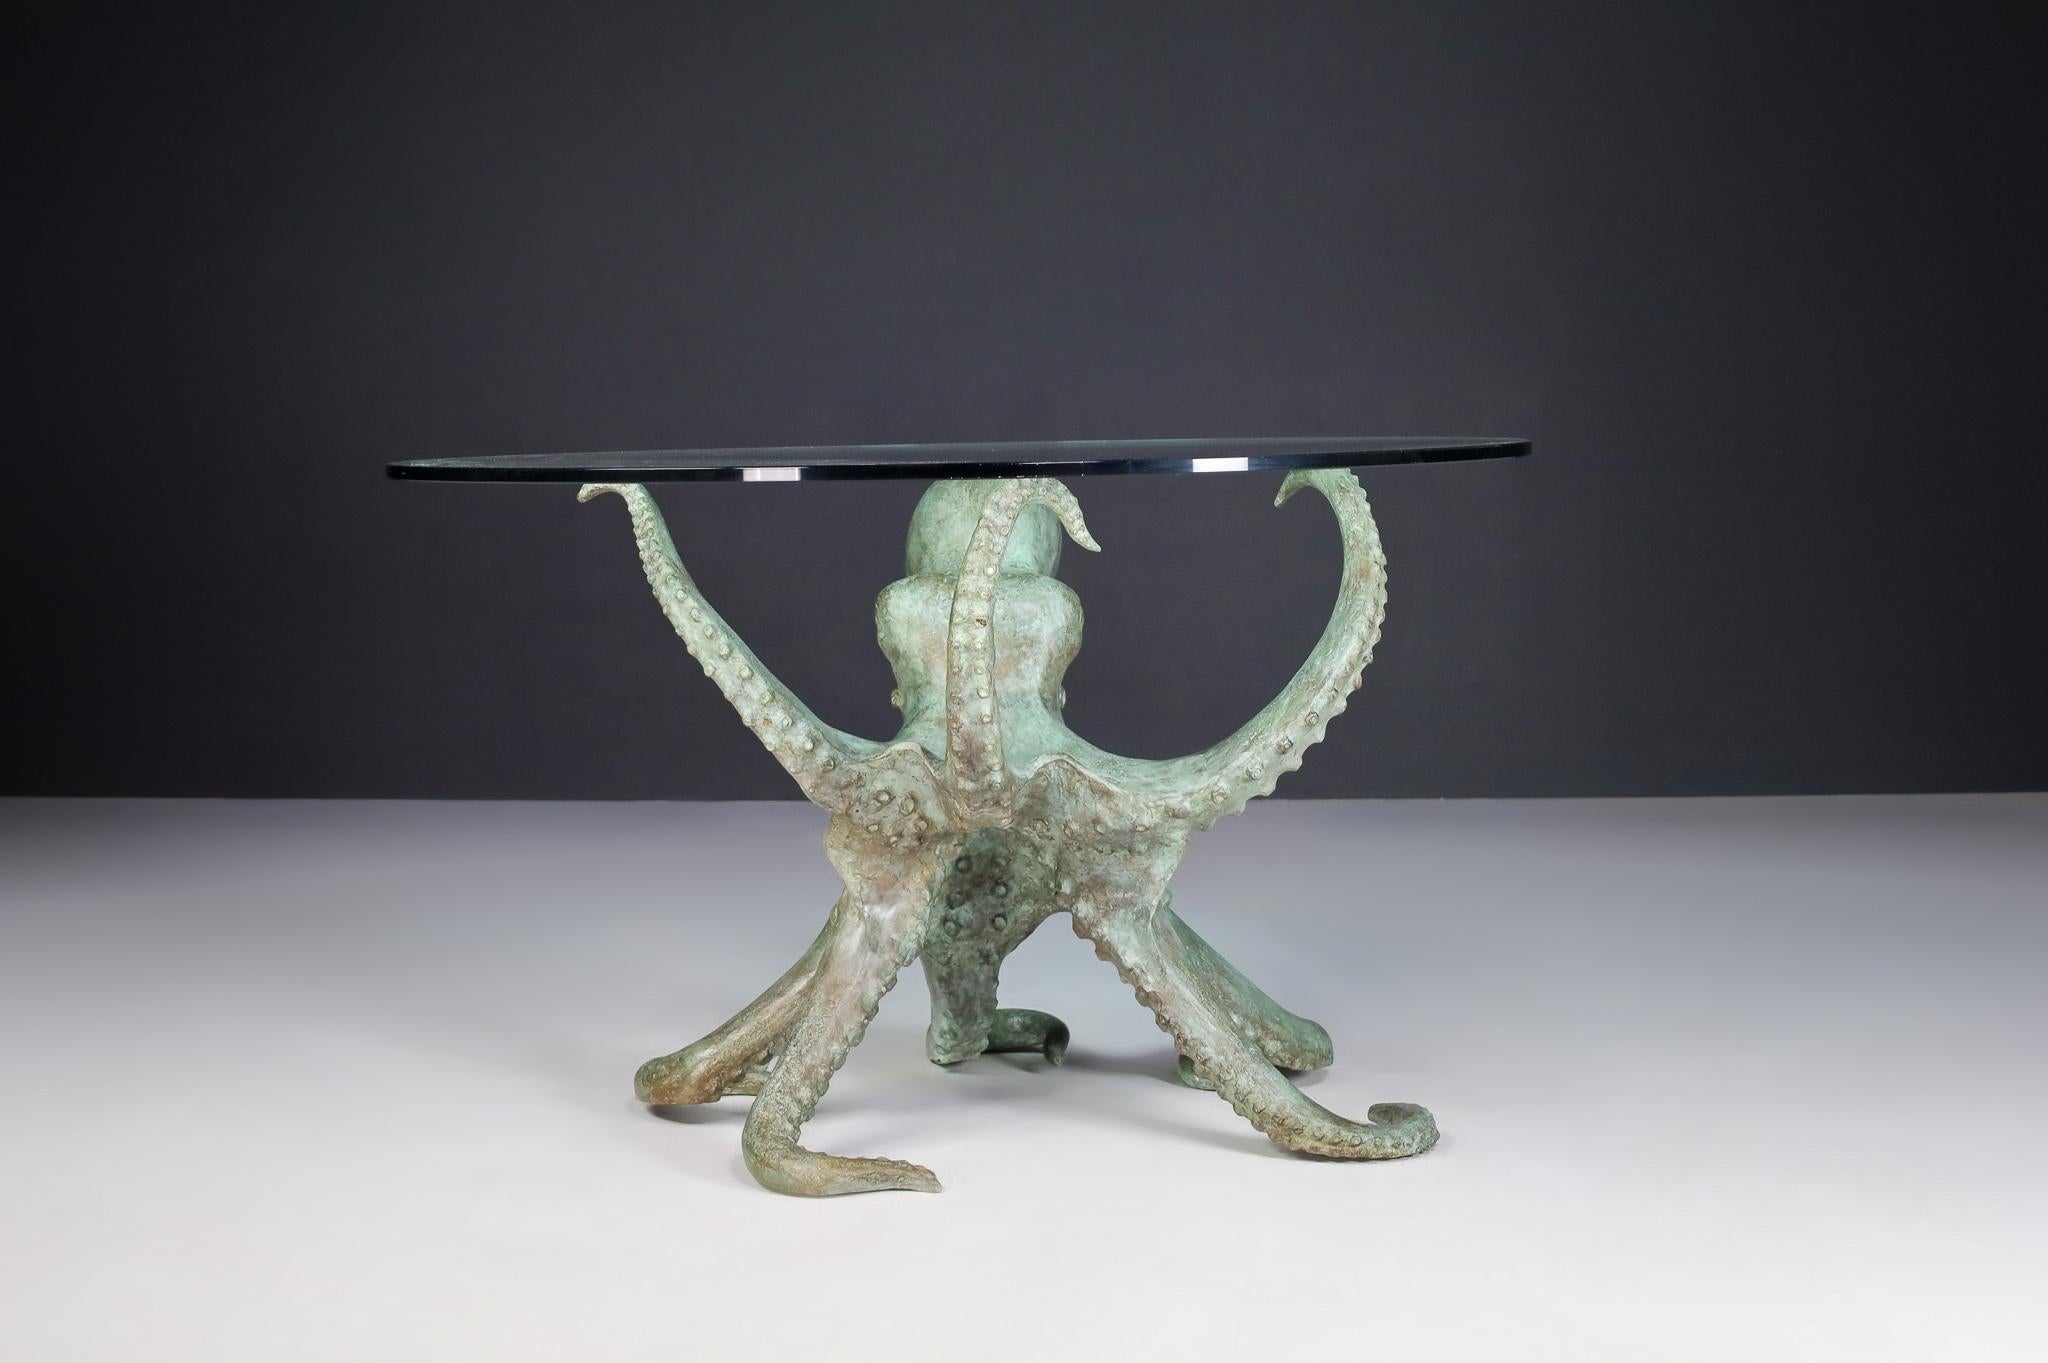 Hollywood Regency Patinated Bronze Octopus Table or Sculpture, 1970s Italy For Sale